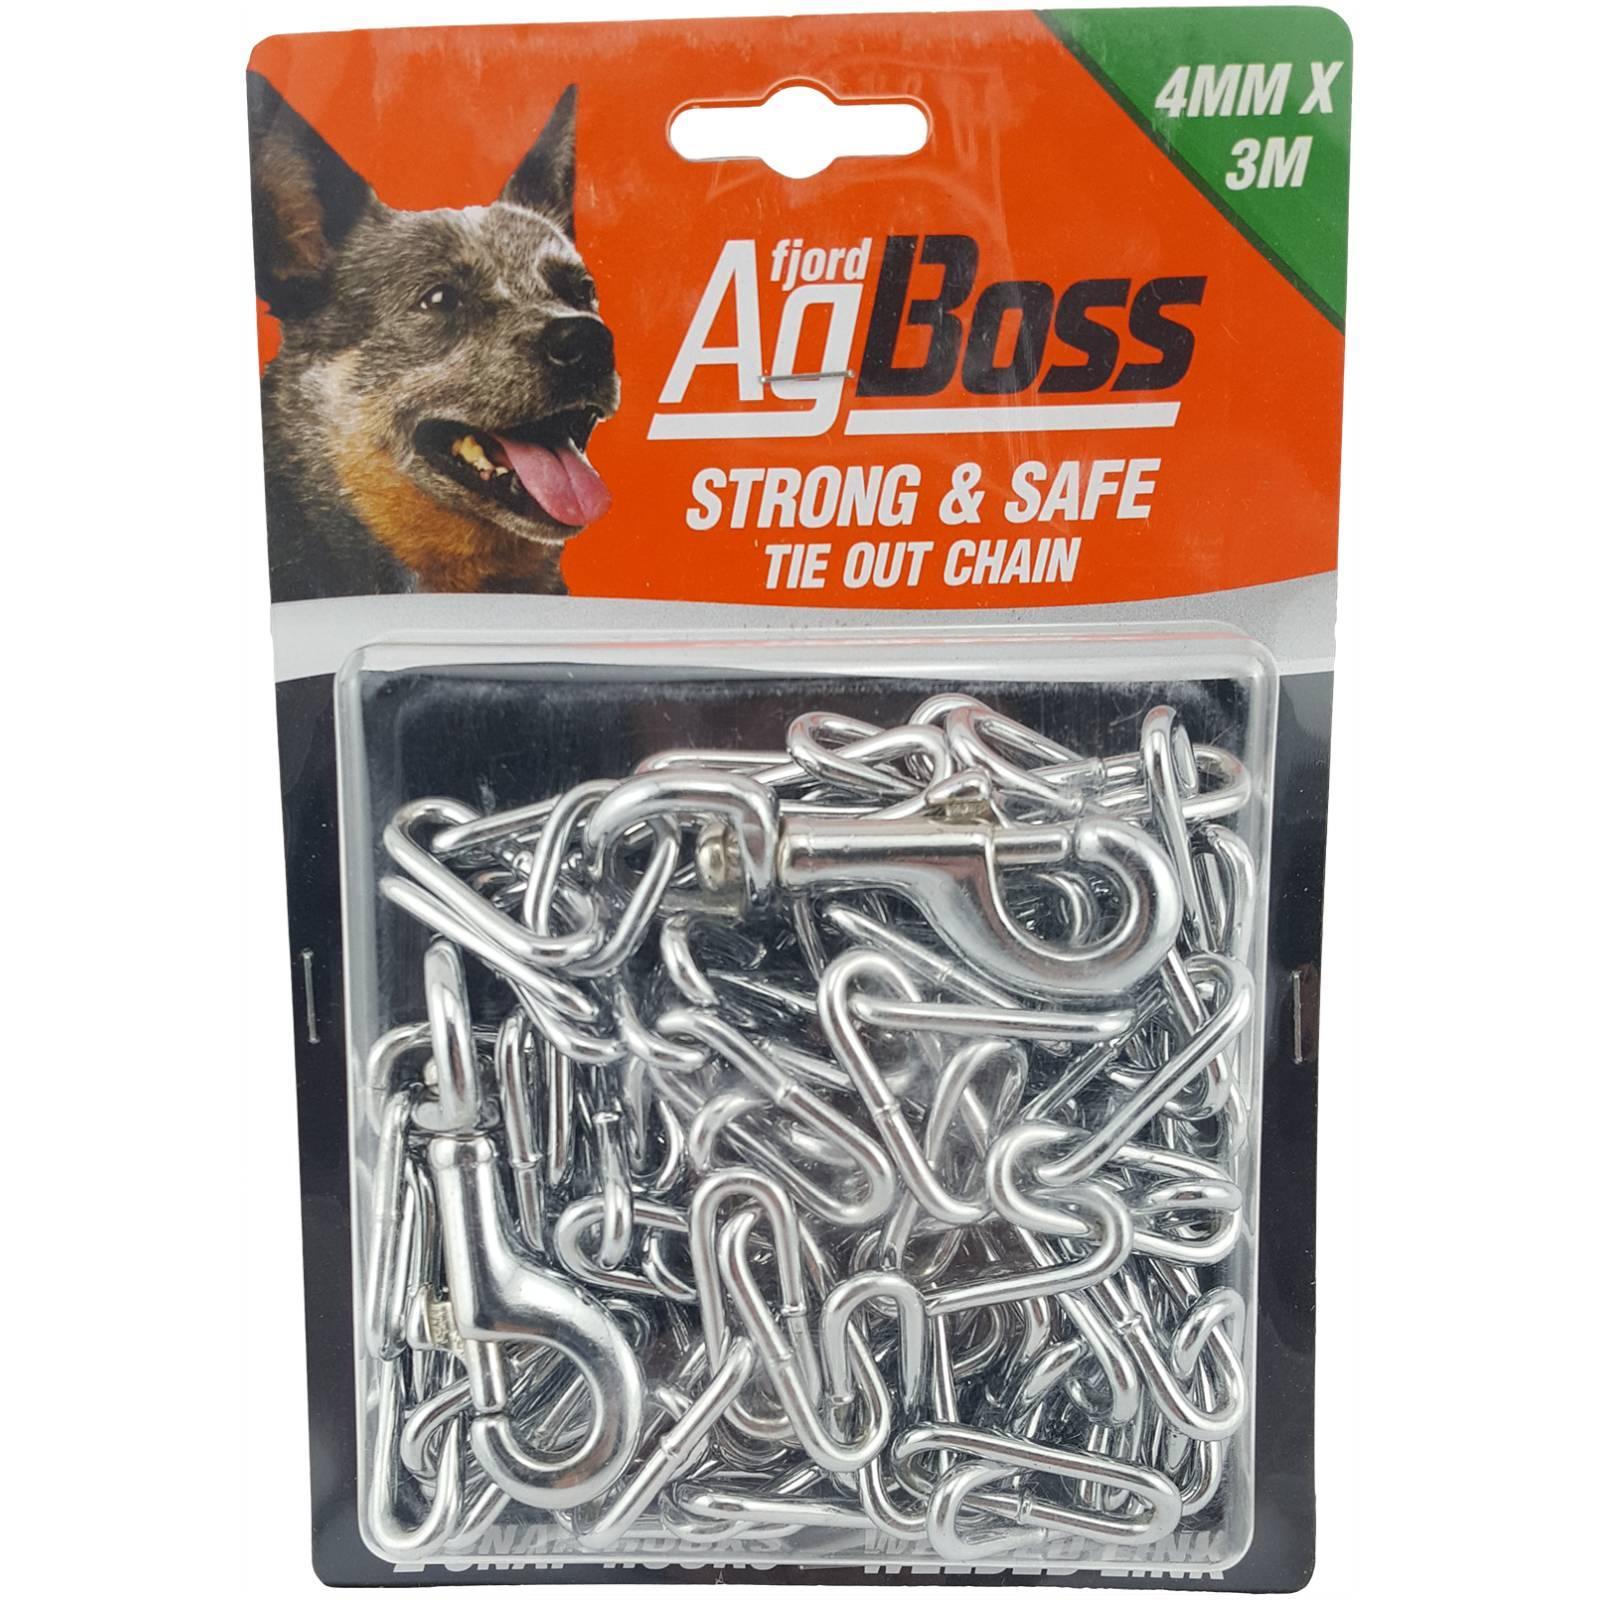 AgBoss 4mm x 3m Tie Out Chain Dog Pet Tie Out Chain 4mm Thick Heavy Duty